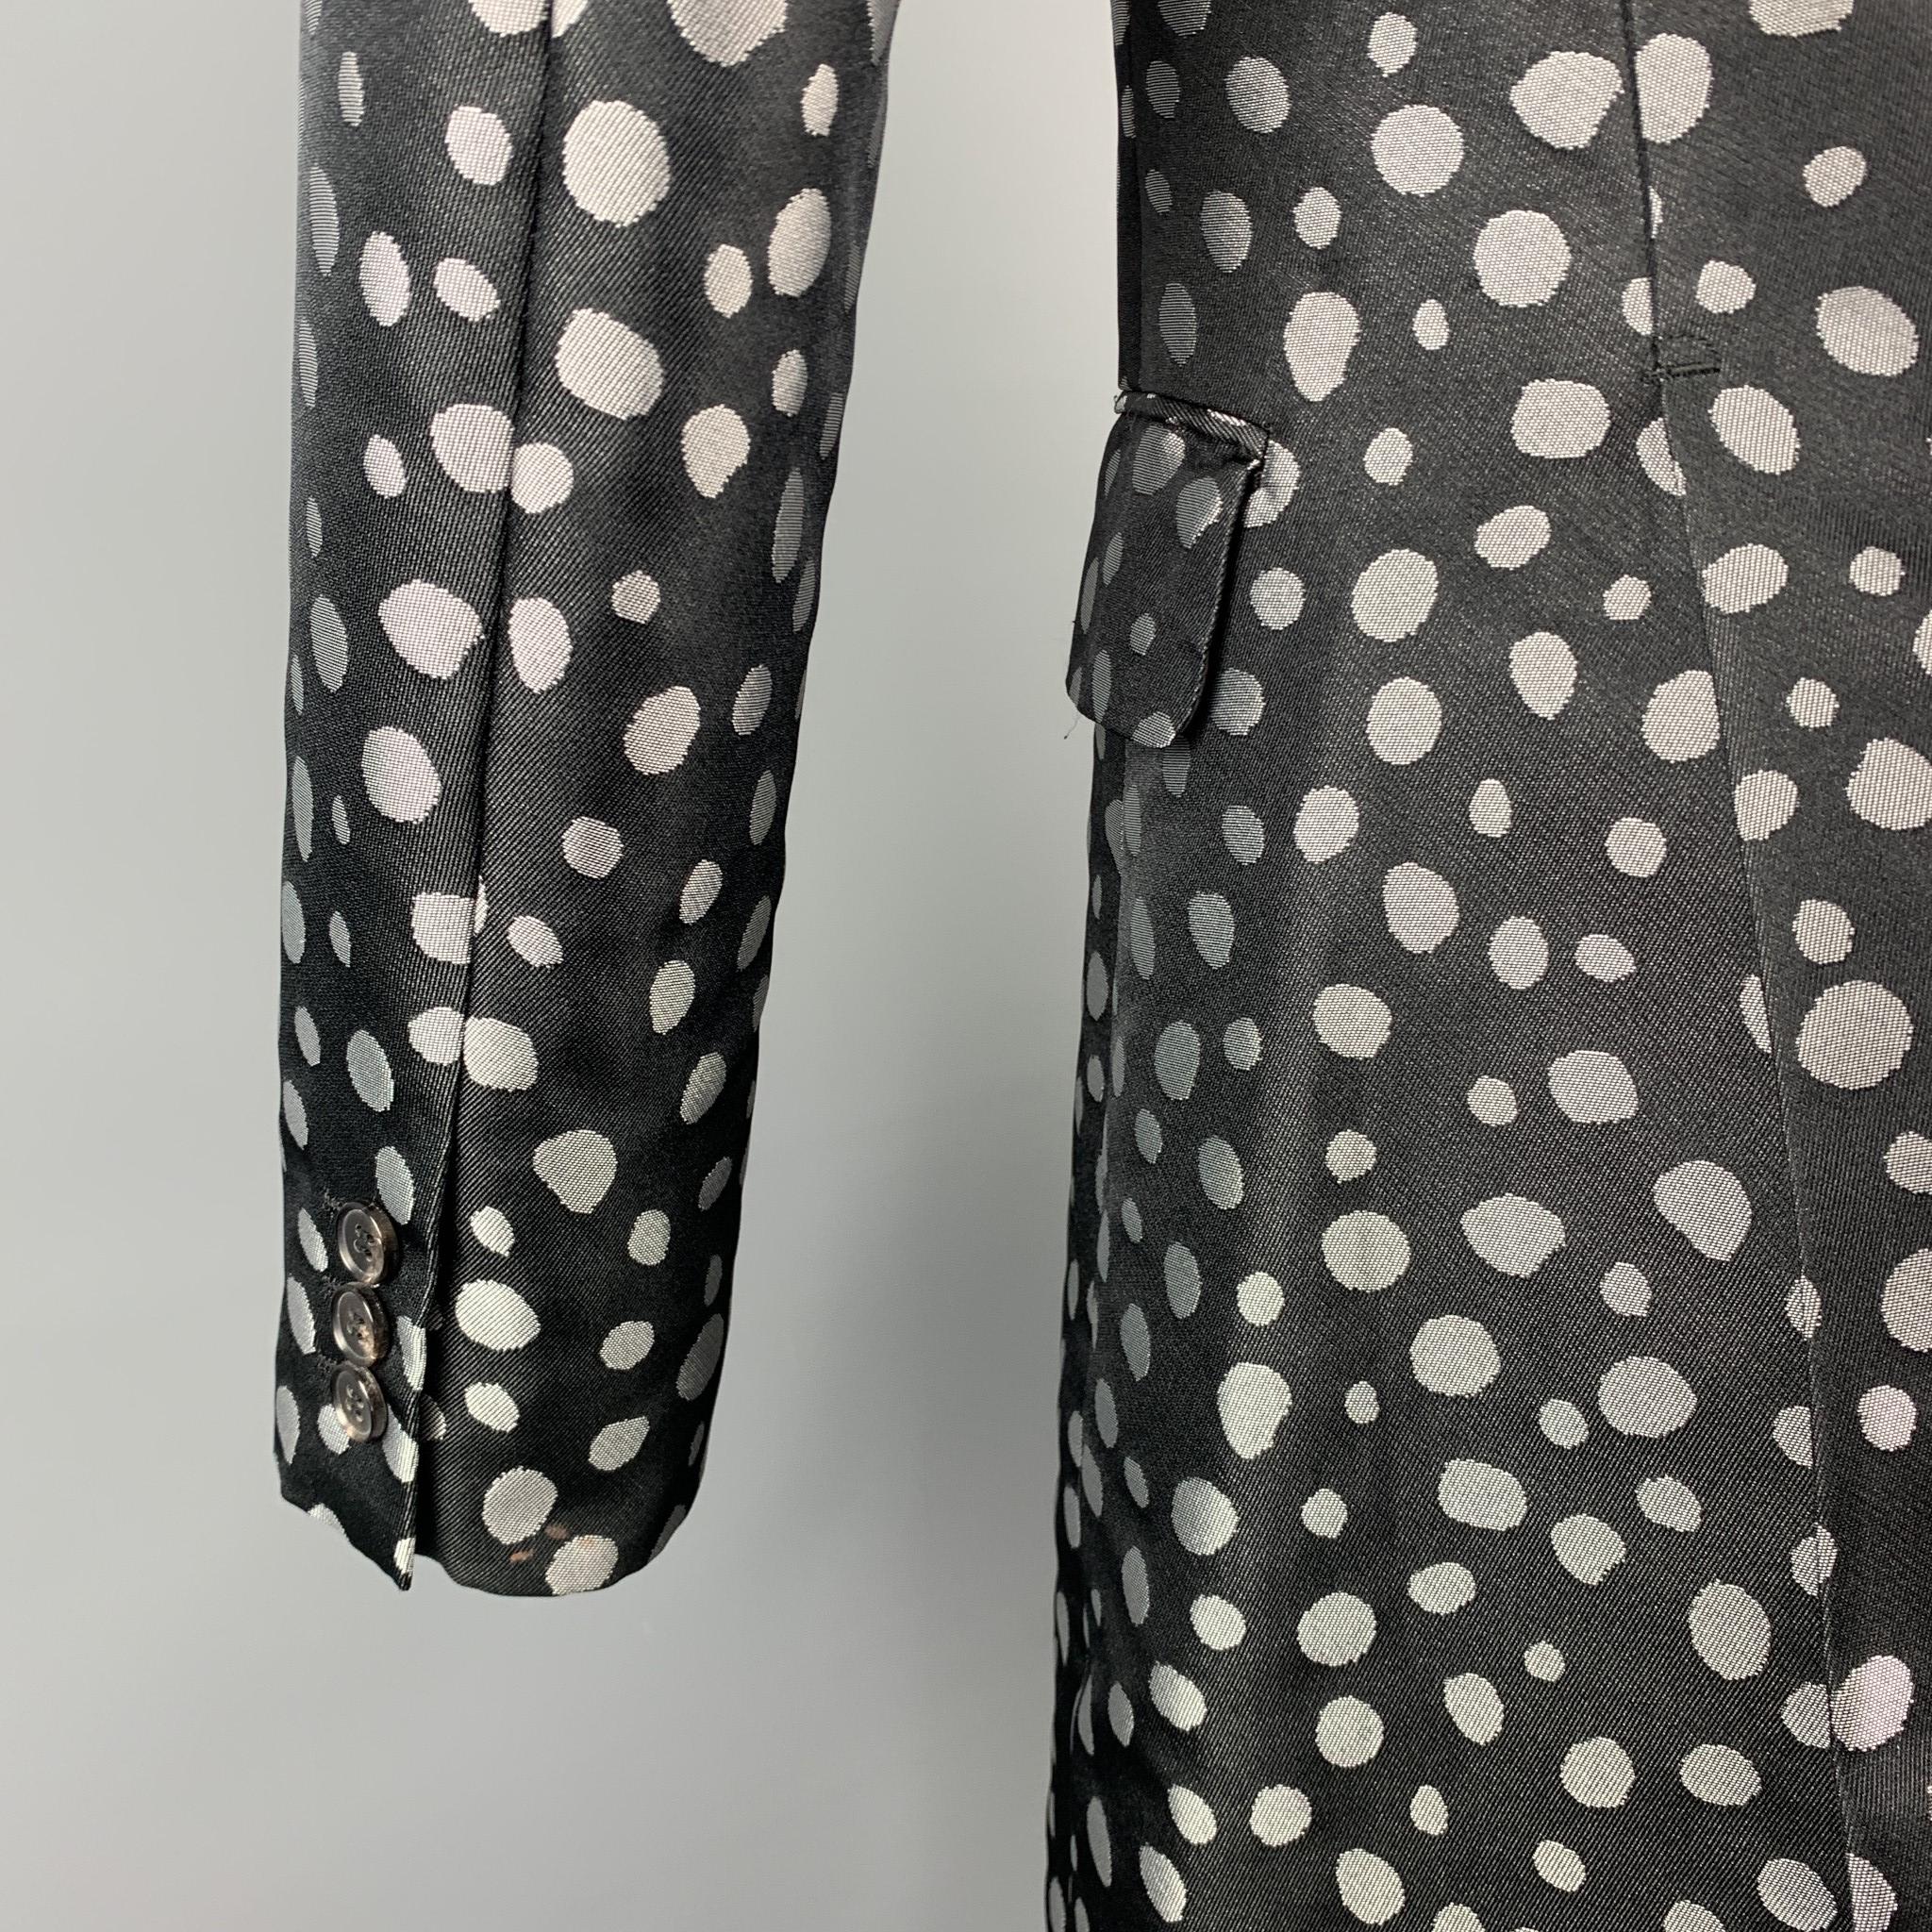 COMME des GARCONS HOMME PLUS coat comes in a black & silver dot print polyester with a half black liner featuring a notch lapel, flap pockets, double back vent, and a three button closure. Made in Japan.

Excellent Pre-Owned Condition.
Marked: JP S